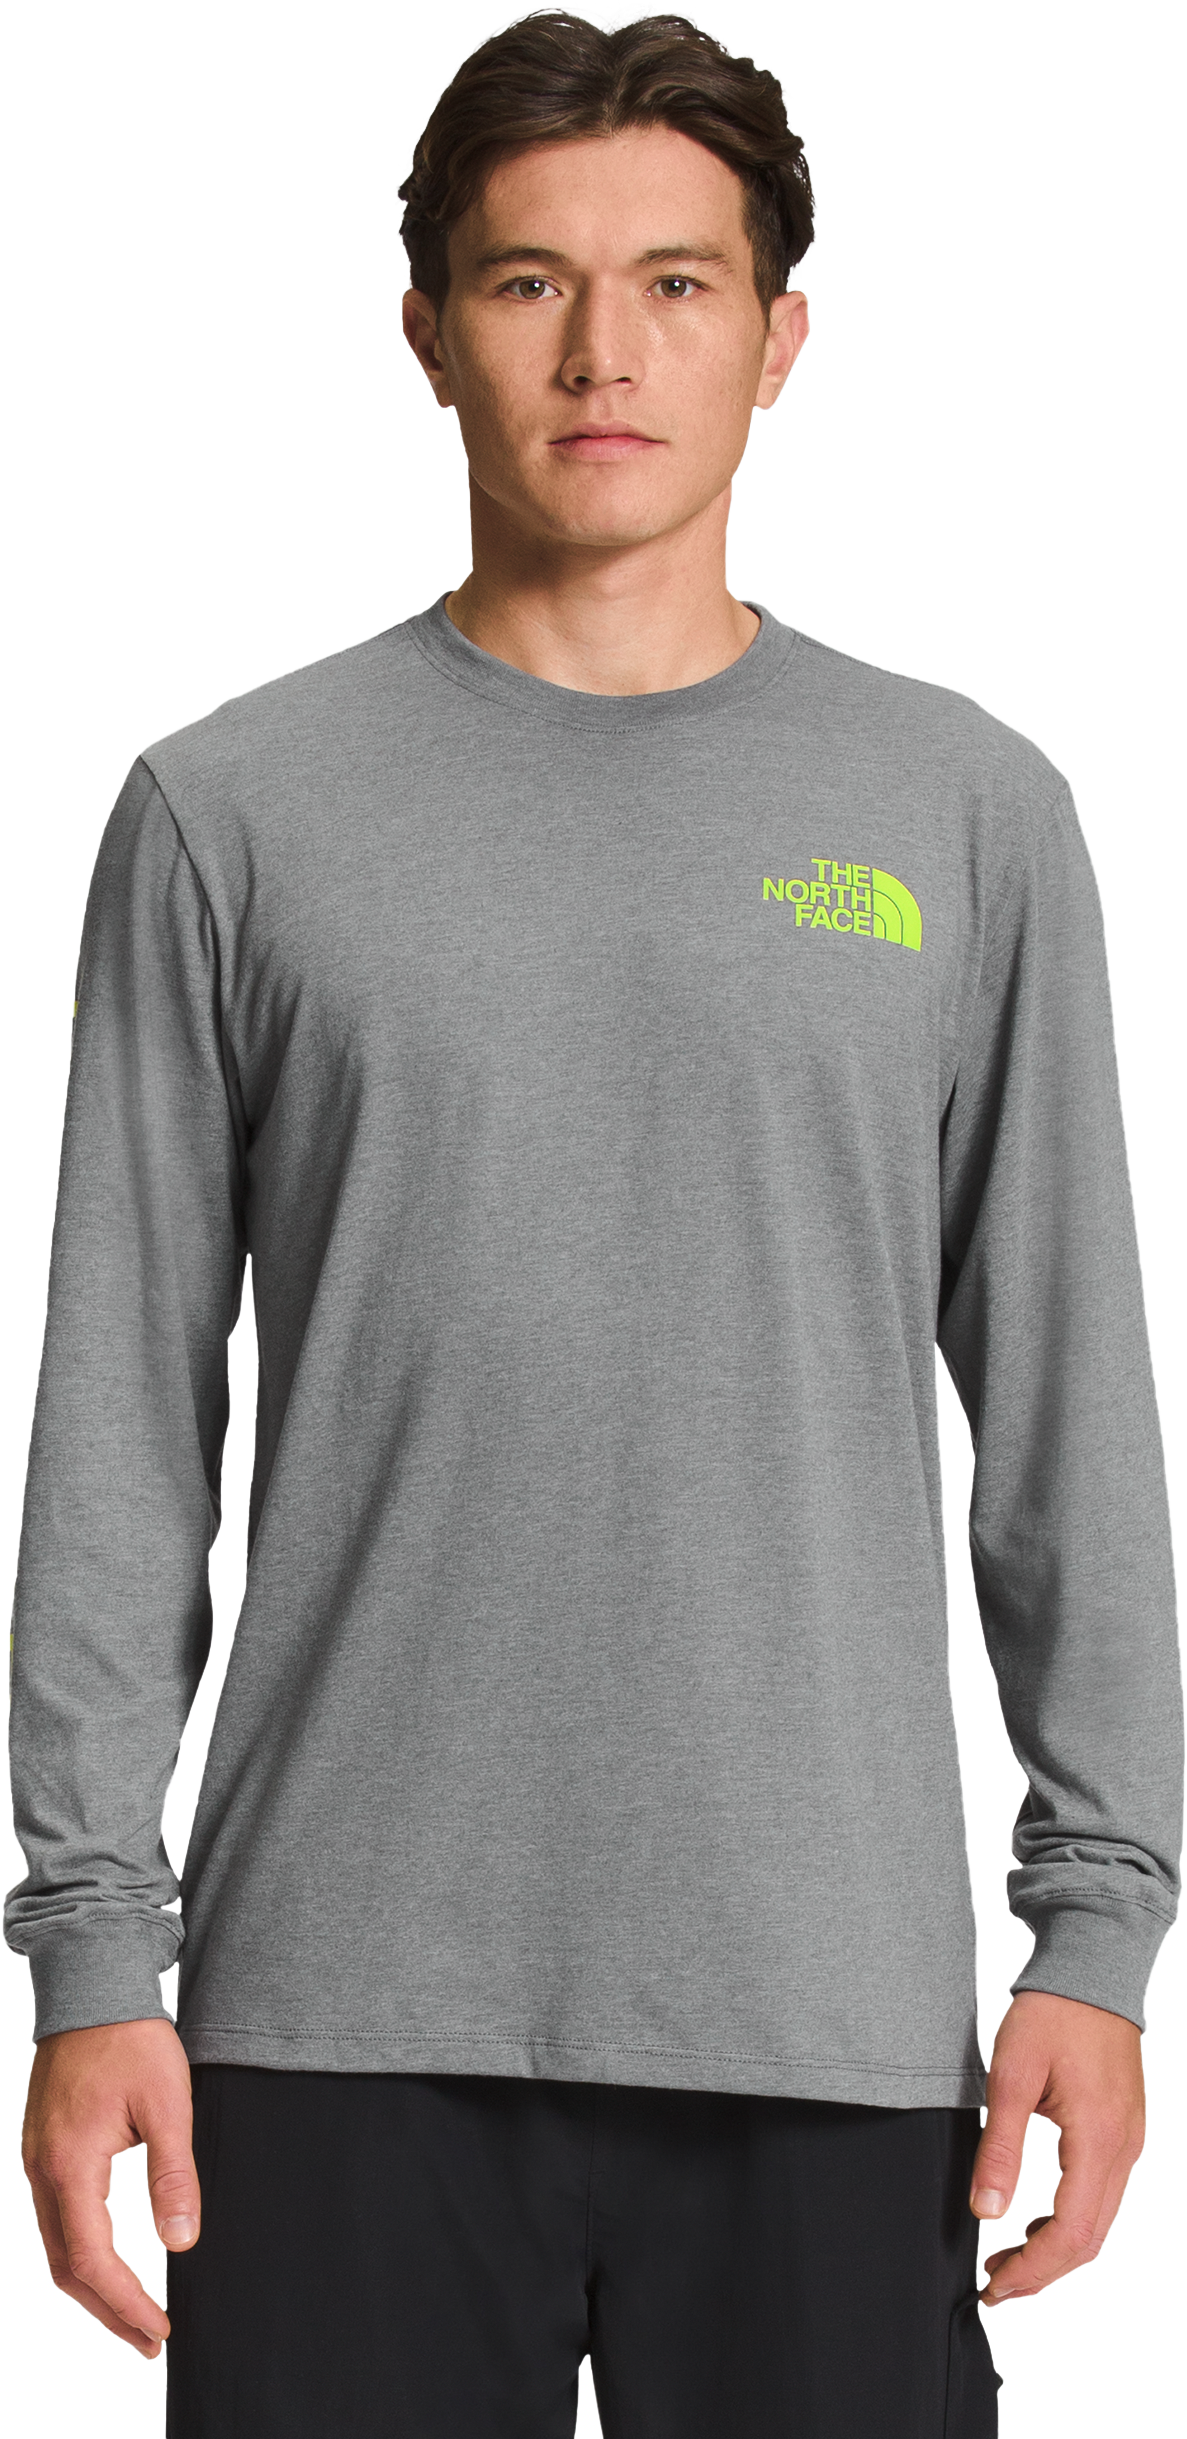 The North Face Hit Graphic Long-Sleeve T-Shirt for Men - TNF Medium Grey Heather/LED Yellow - 2XL